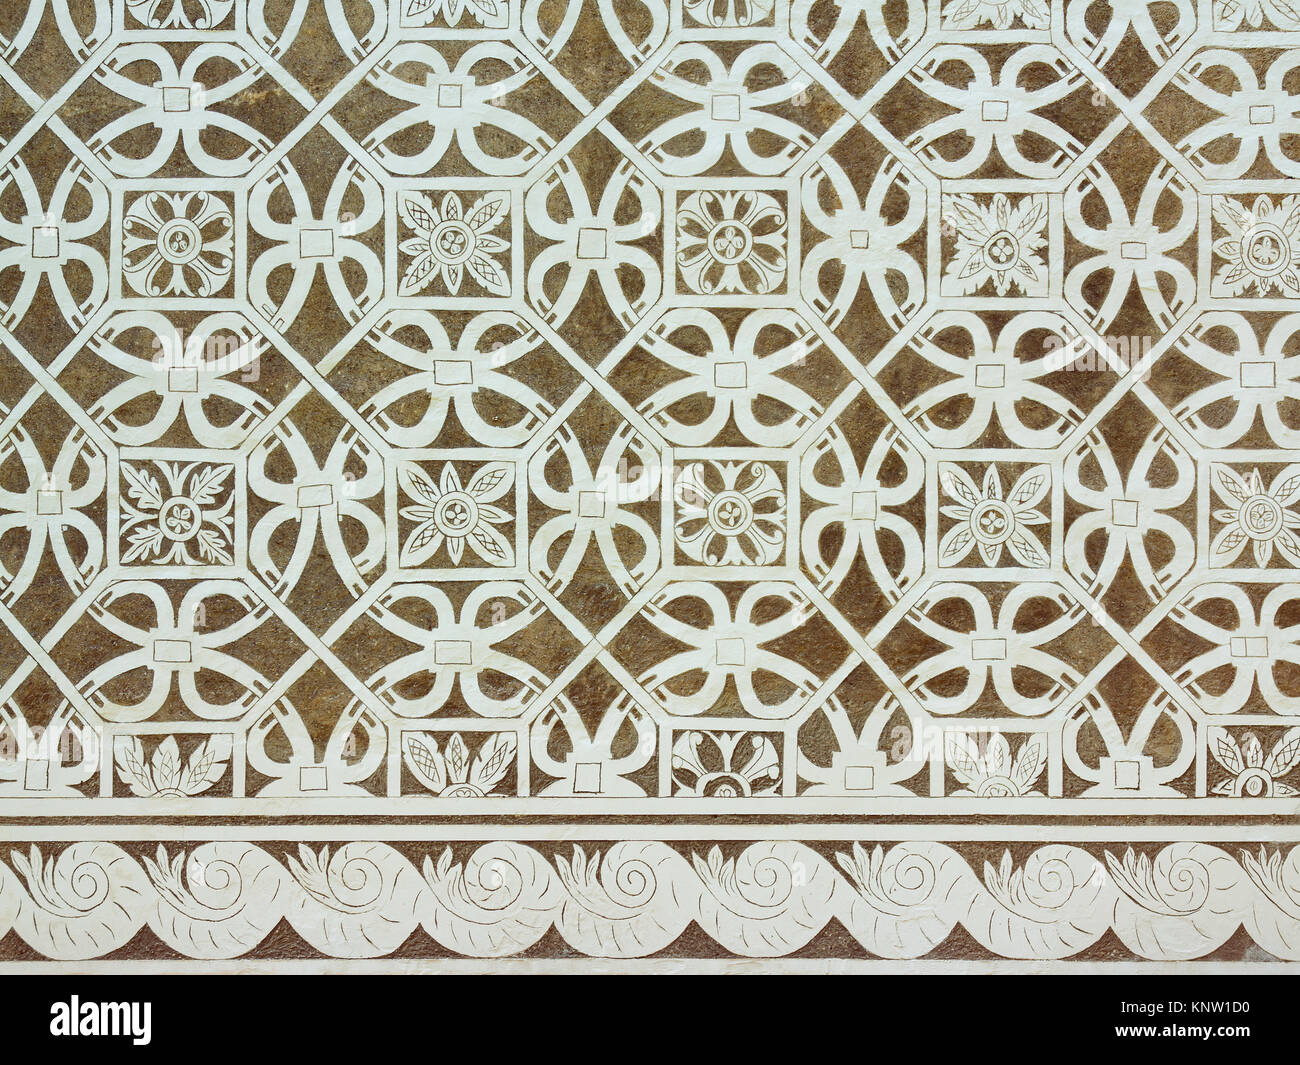 Sgraffito - Renaissance decoration of stucco of walls by scraping Stock Photo